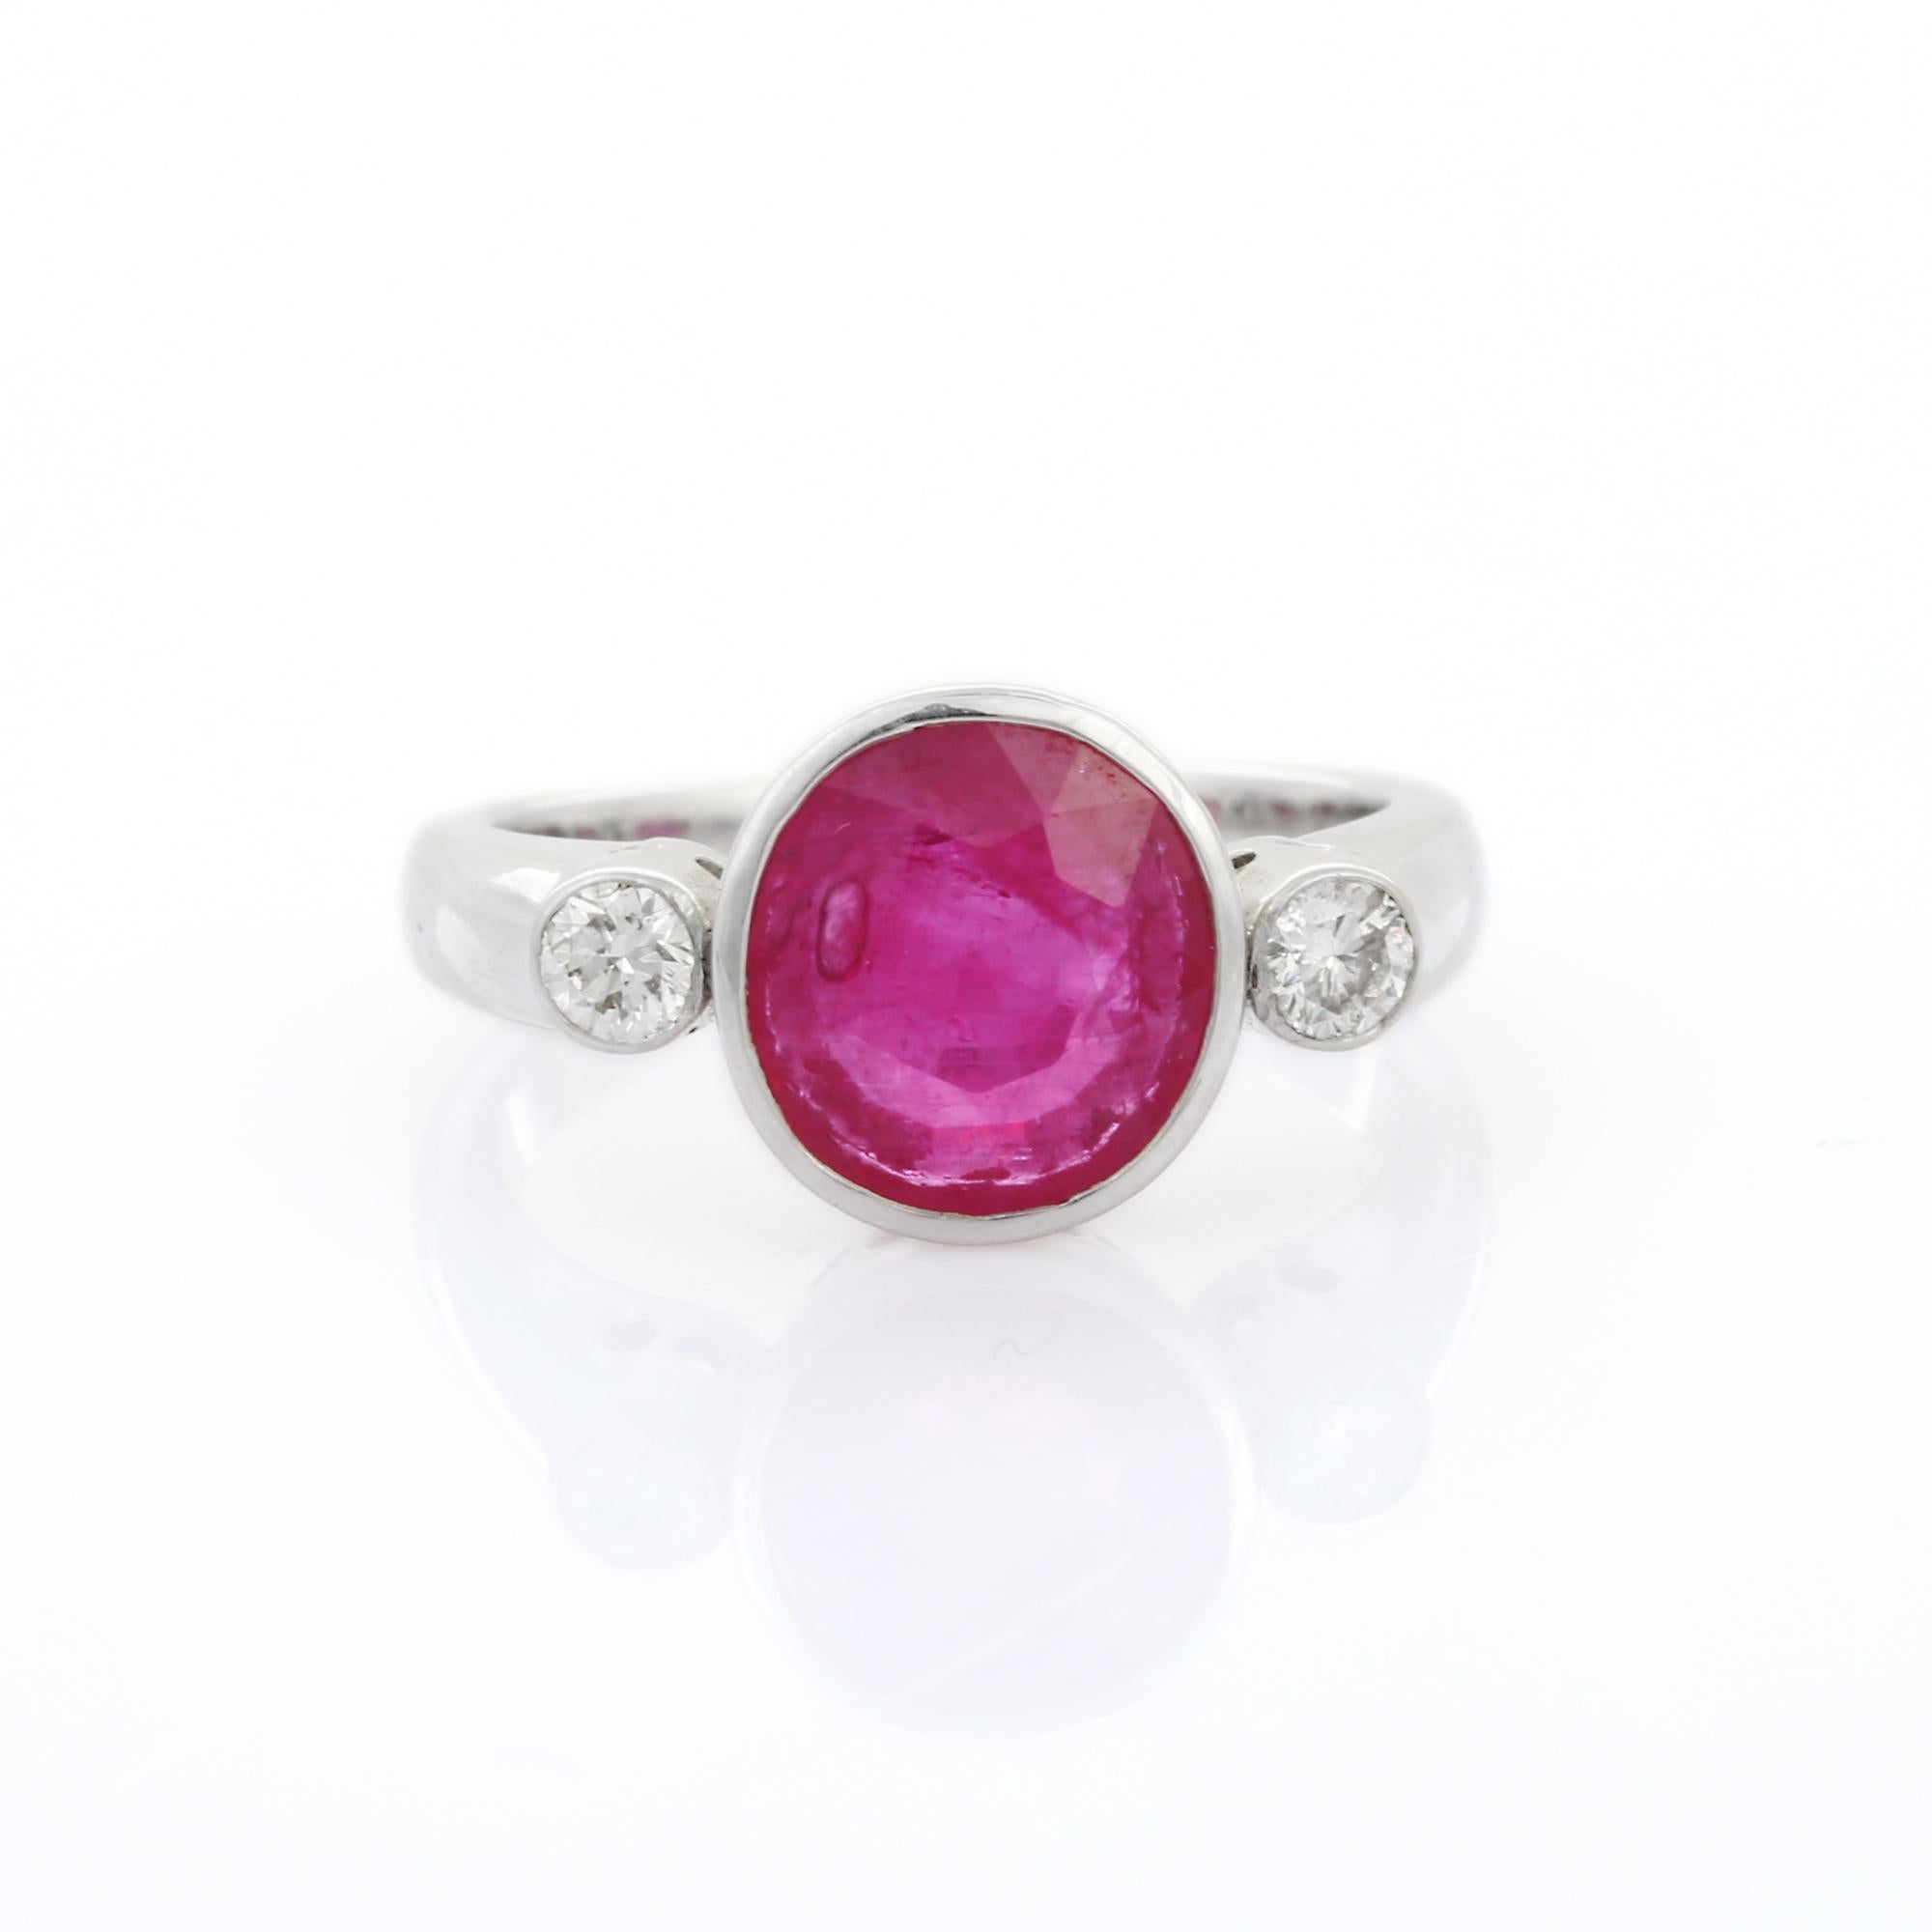 For Sale:  3 Carat Classical Round Cut Ruby and Diamond Three Stone Ring in 18K White Gold  8